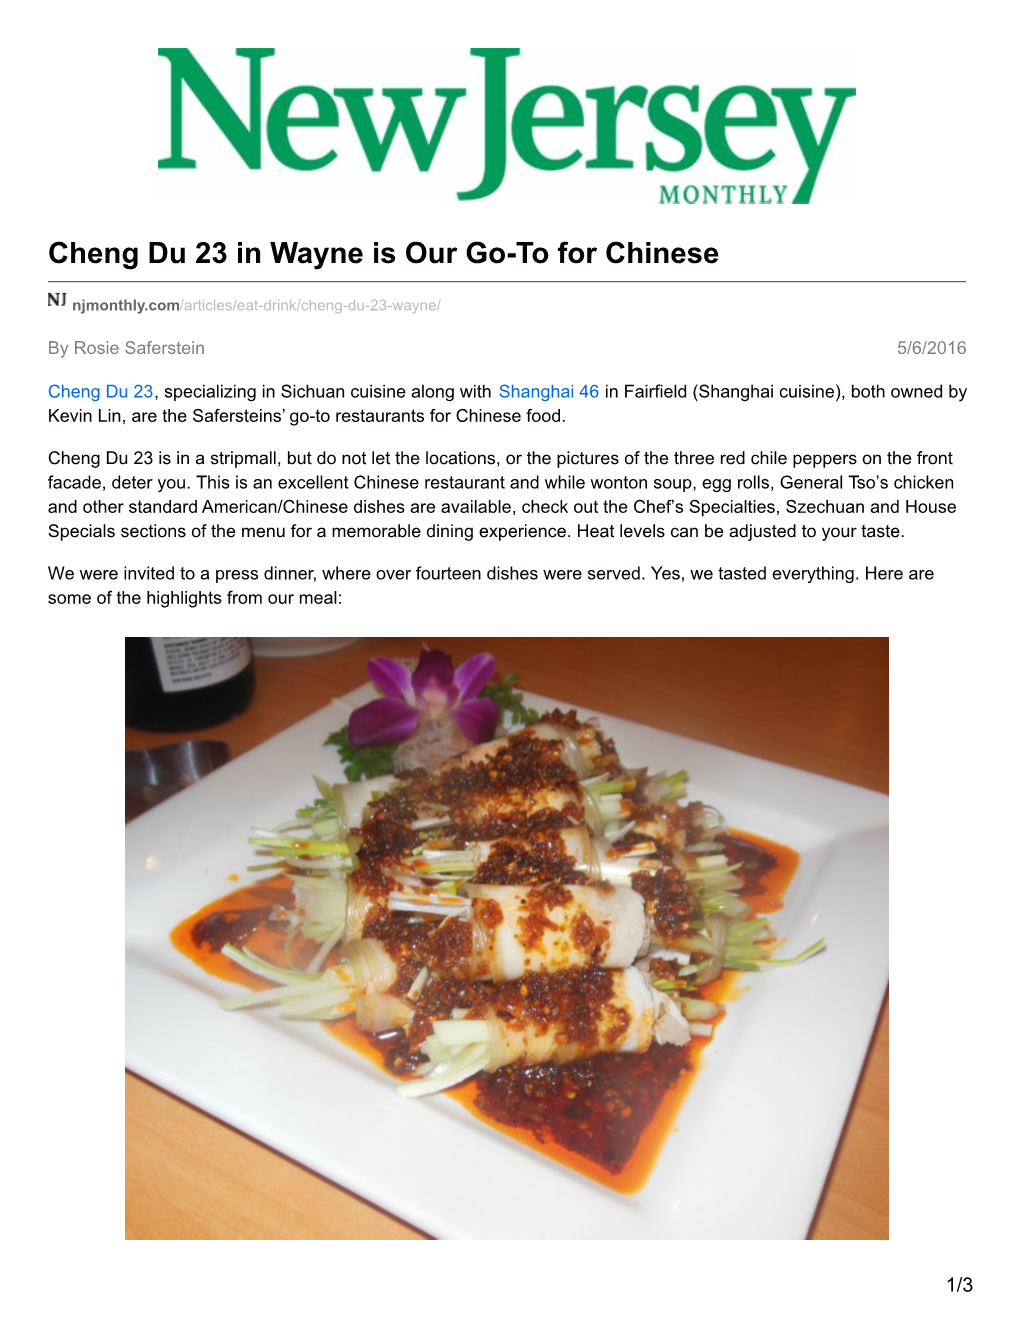 Cheng Du 23 in Wayne Is Our Go-To for Chinese